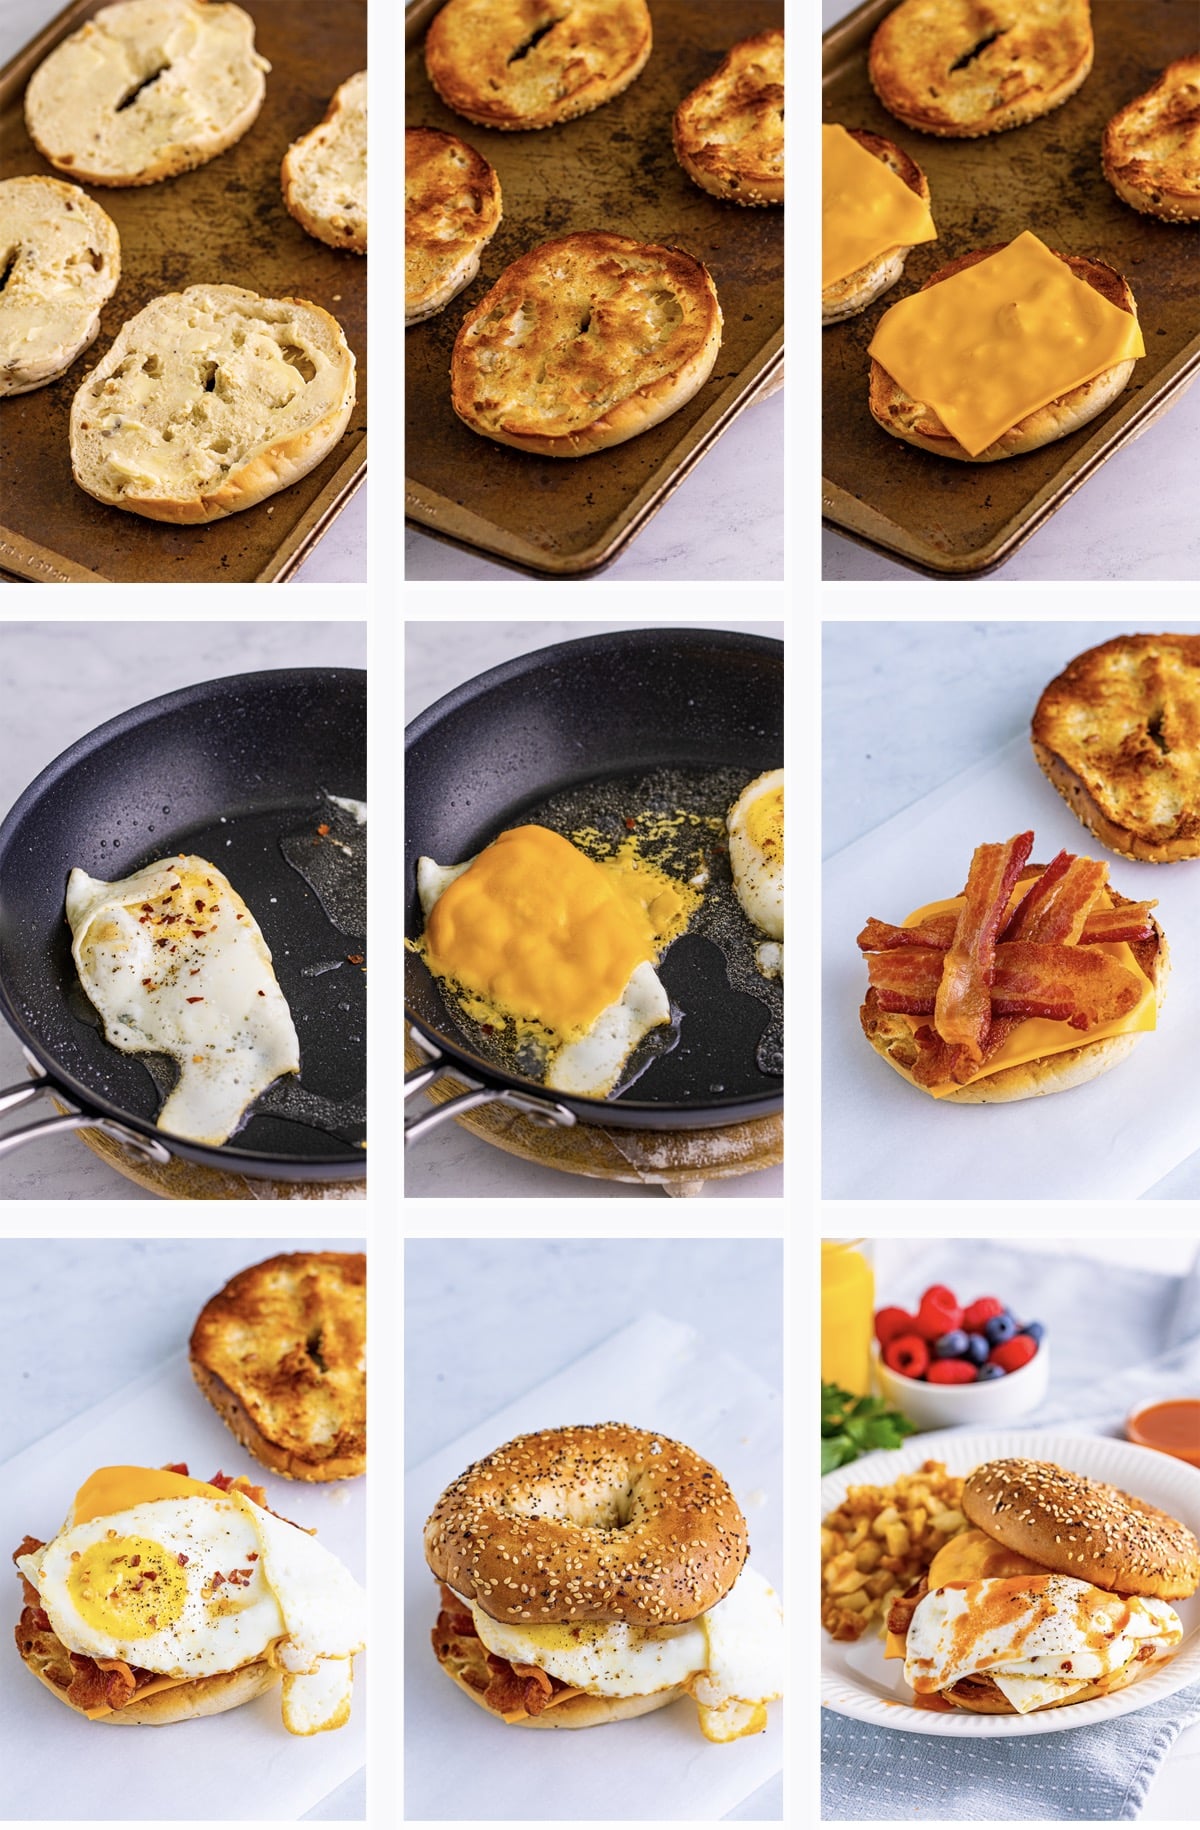 Collage of photos showing how to make Breakfast Bagel Sandwich shown on a grey marble countertop